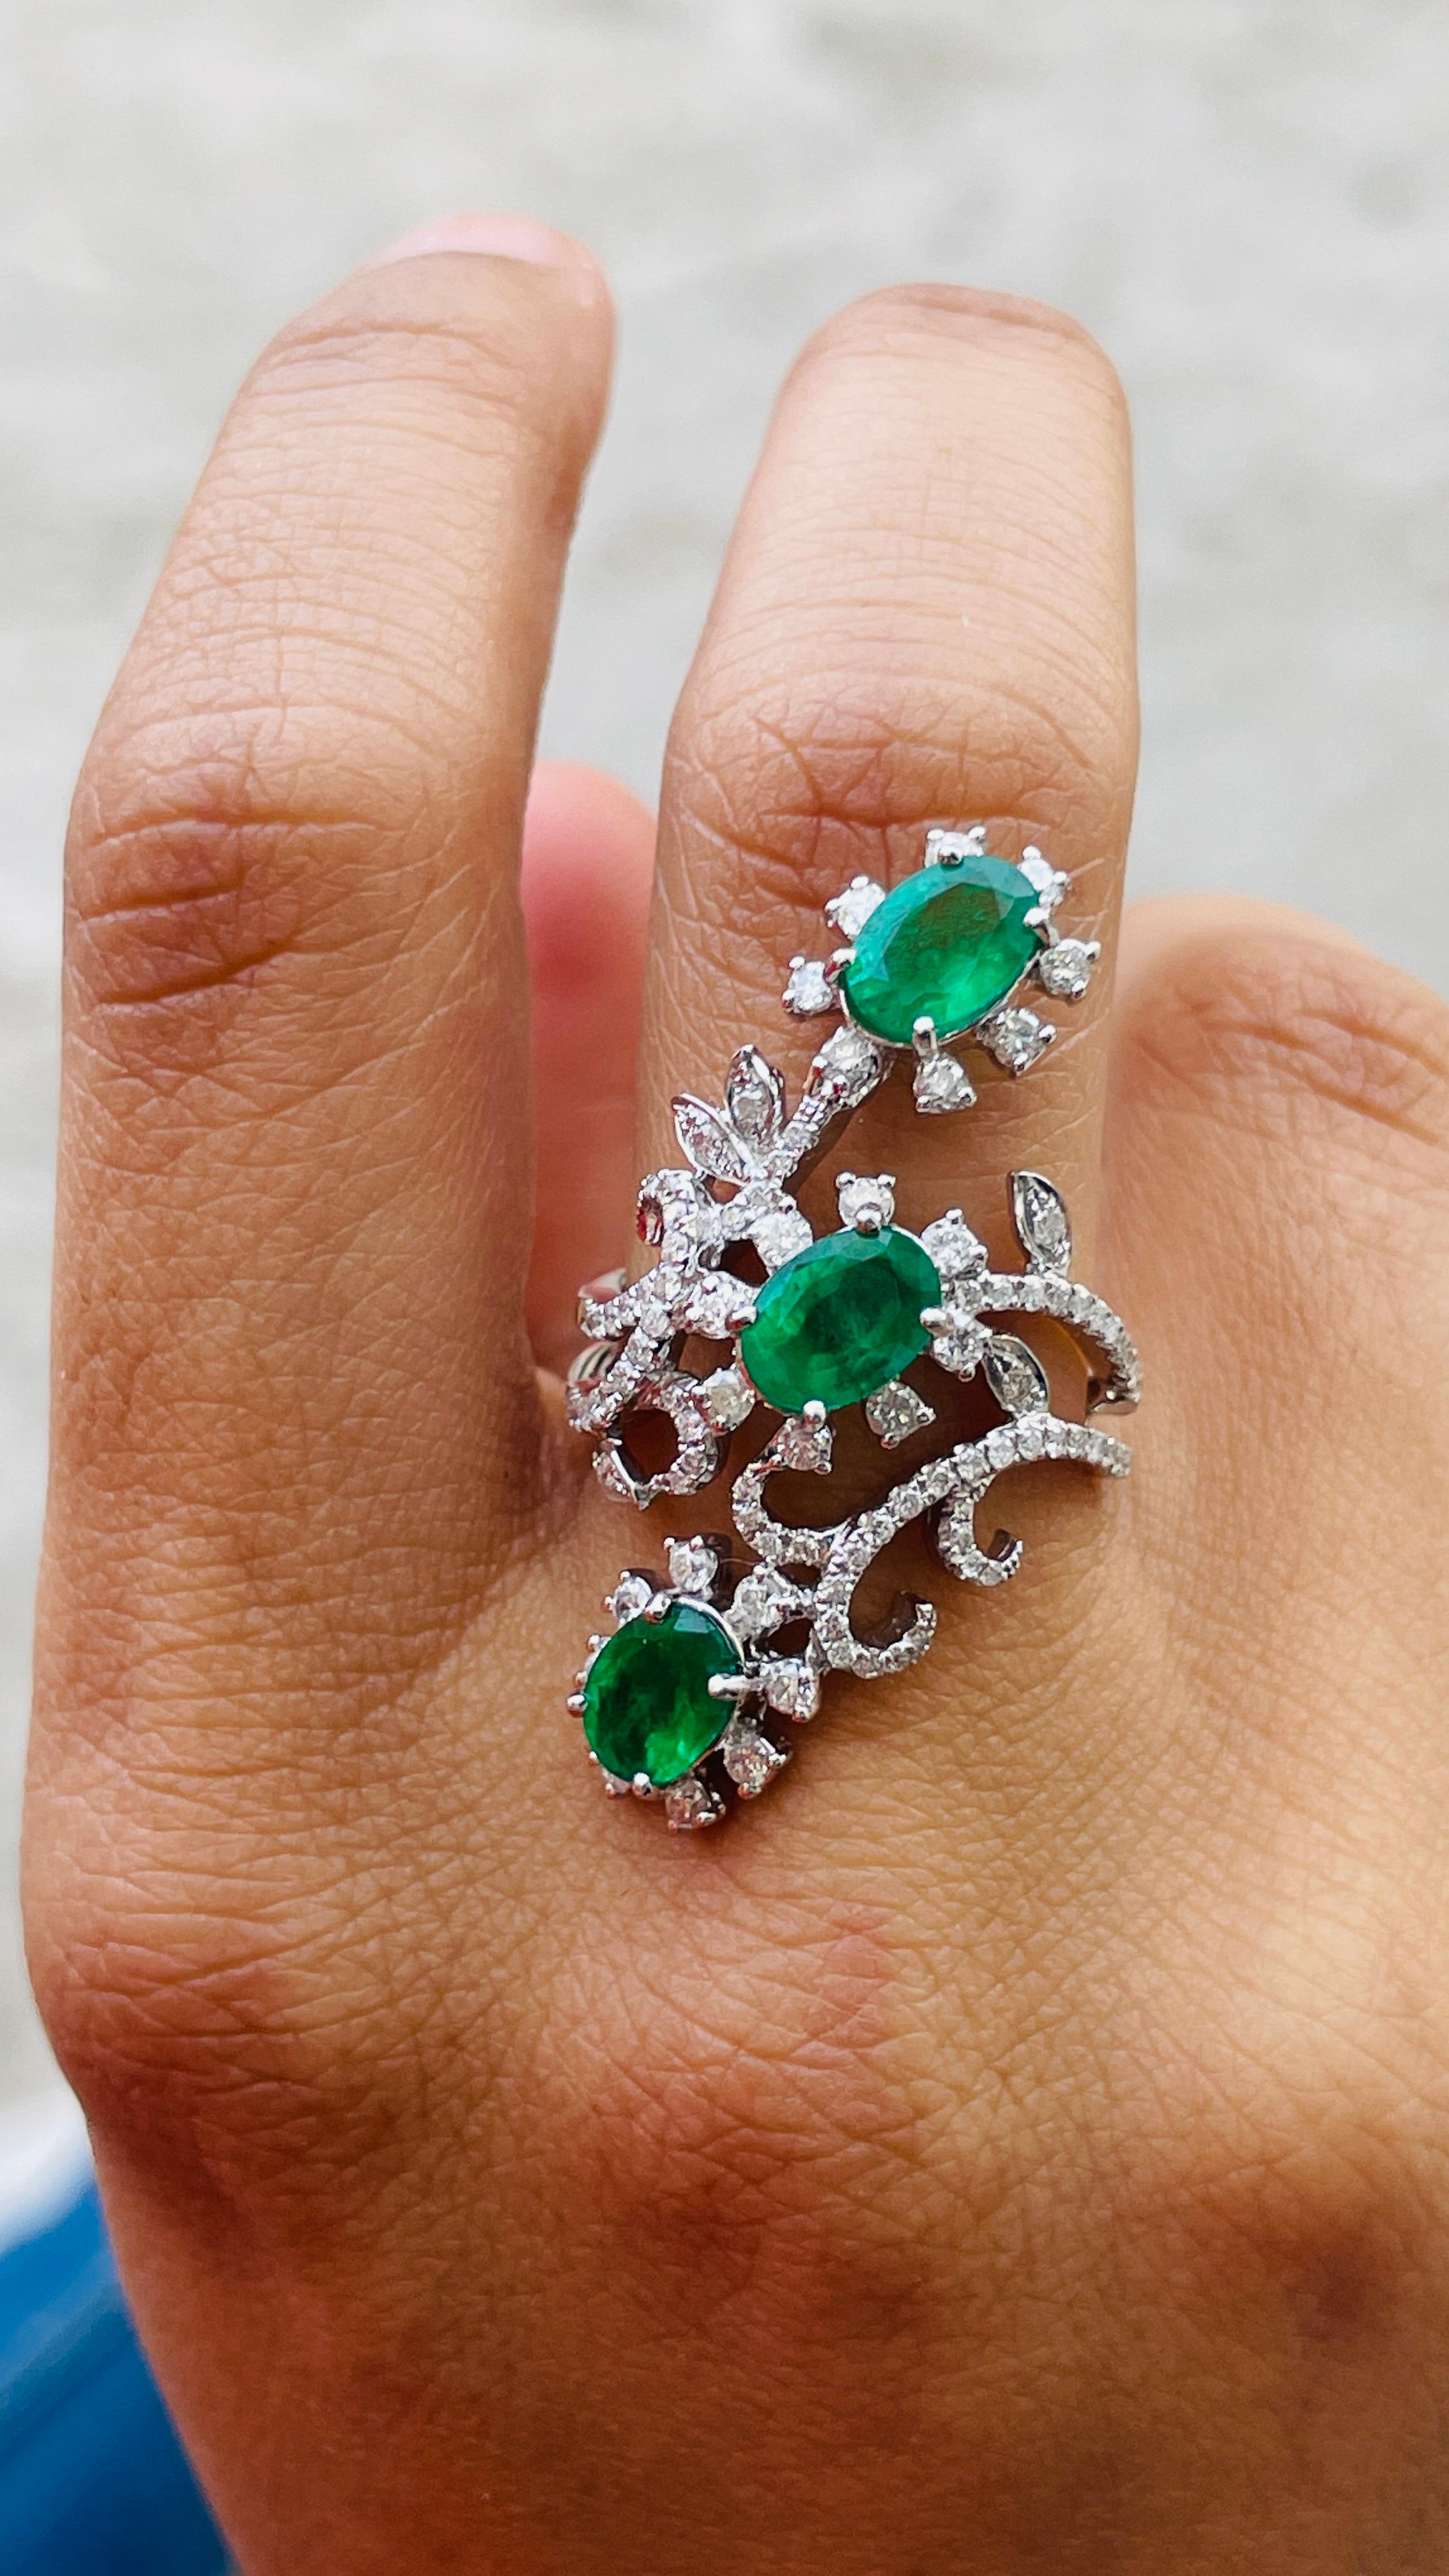 For Sale:  14K White Gold Three Stone Emerald and Diamond Cocktail Ring 4